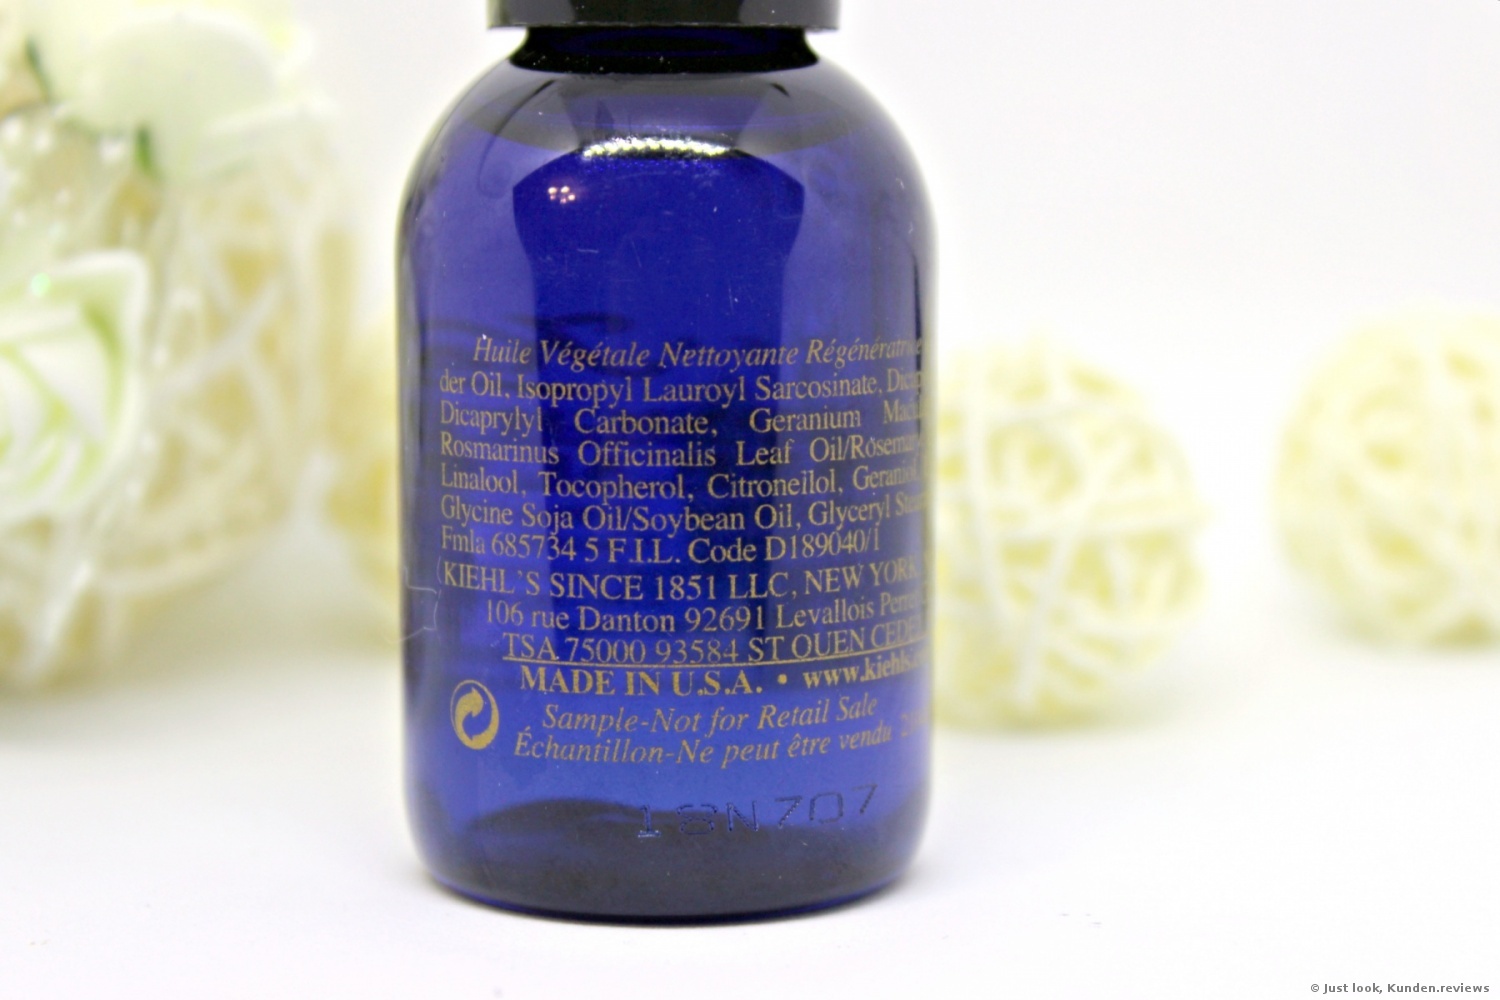 Kiehl’s Midnight Recovery Botanical Cleansing Oil